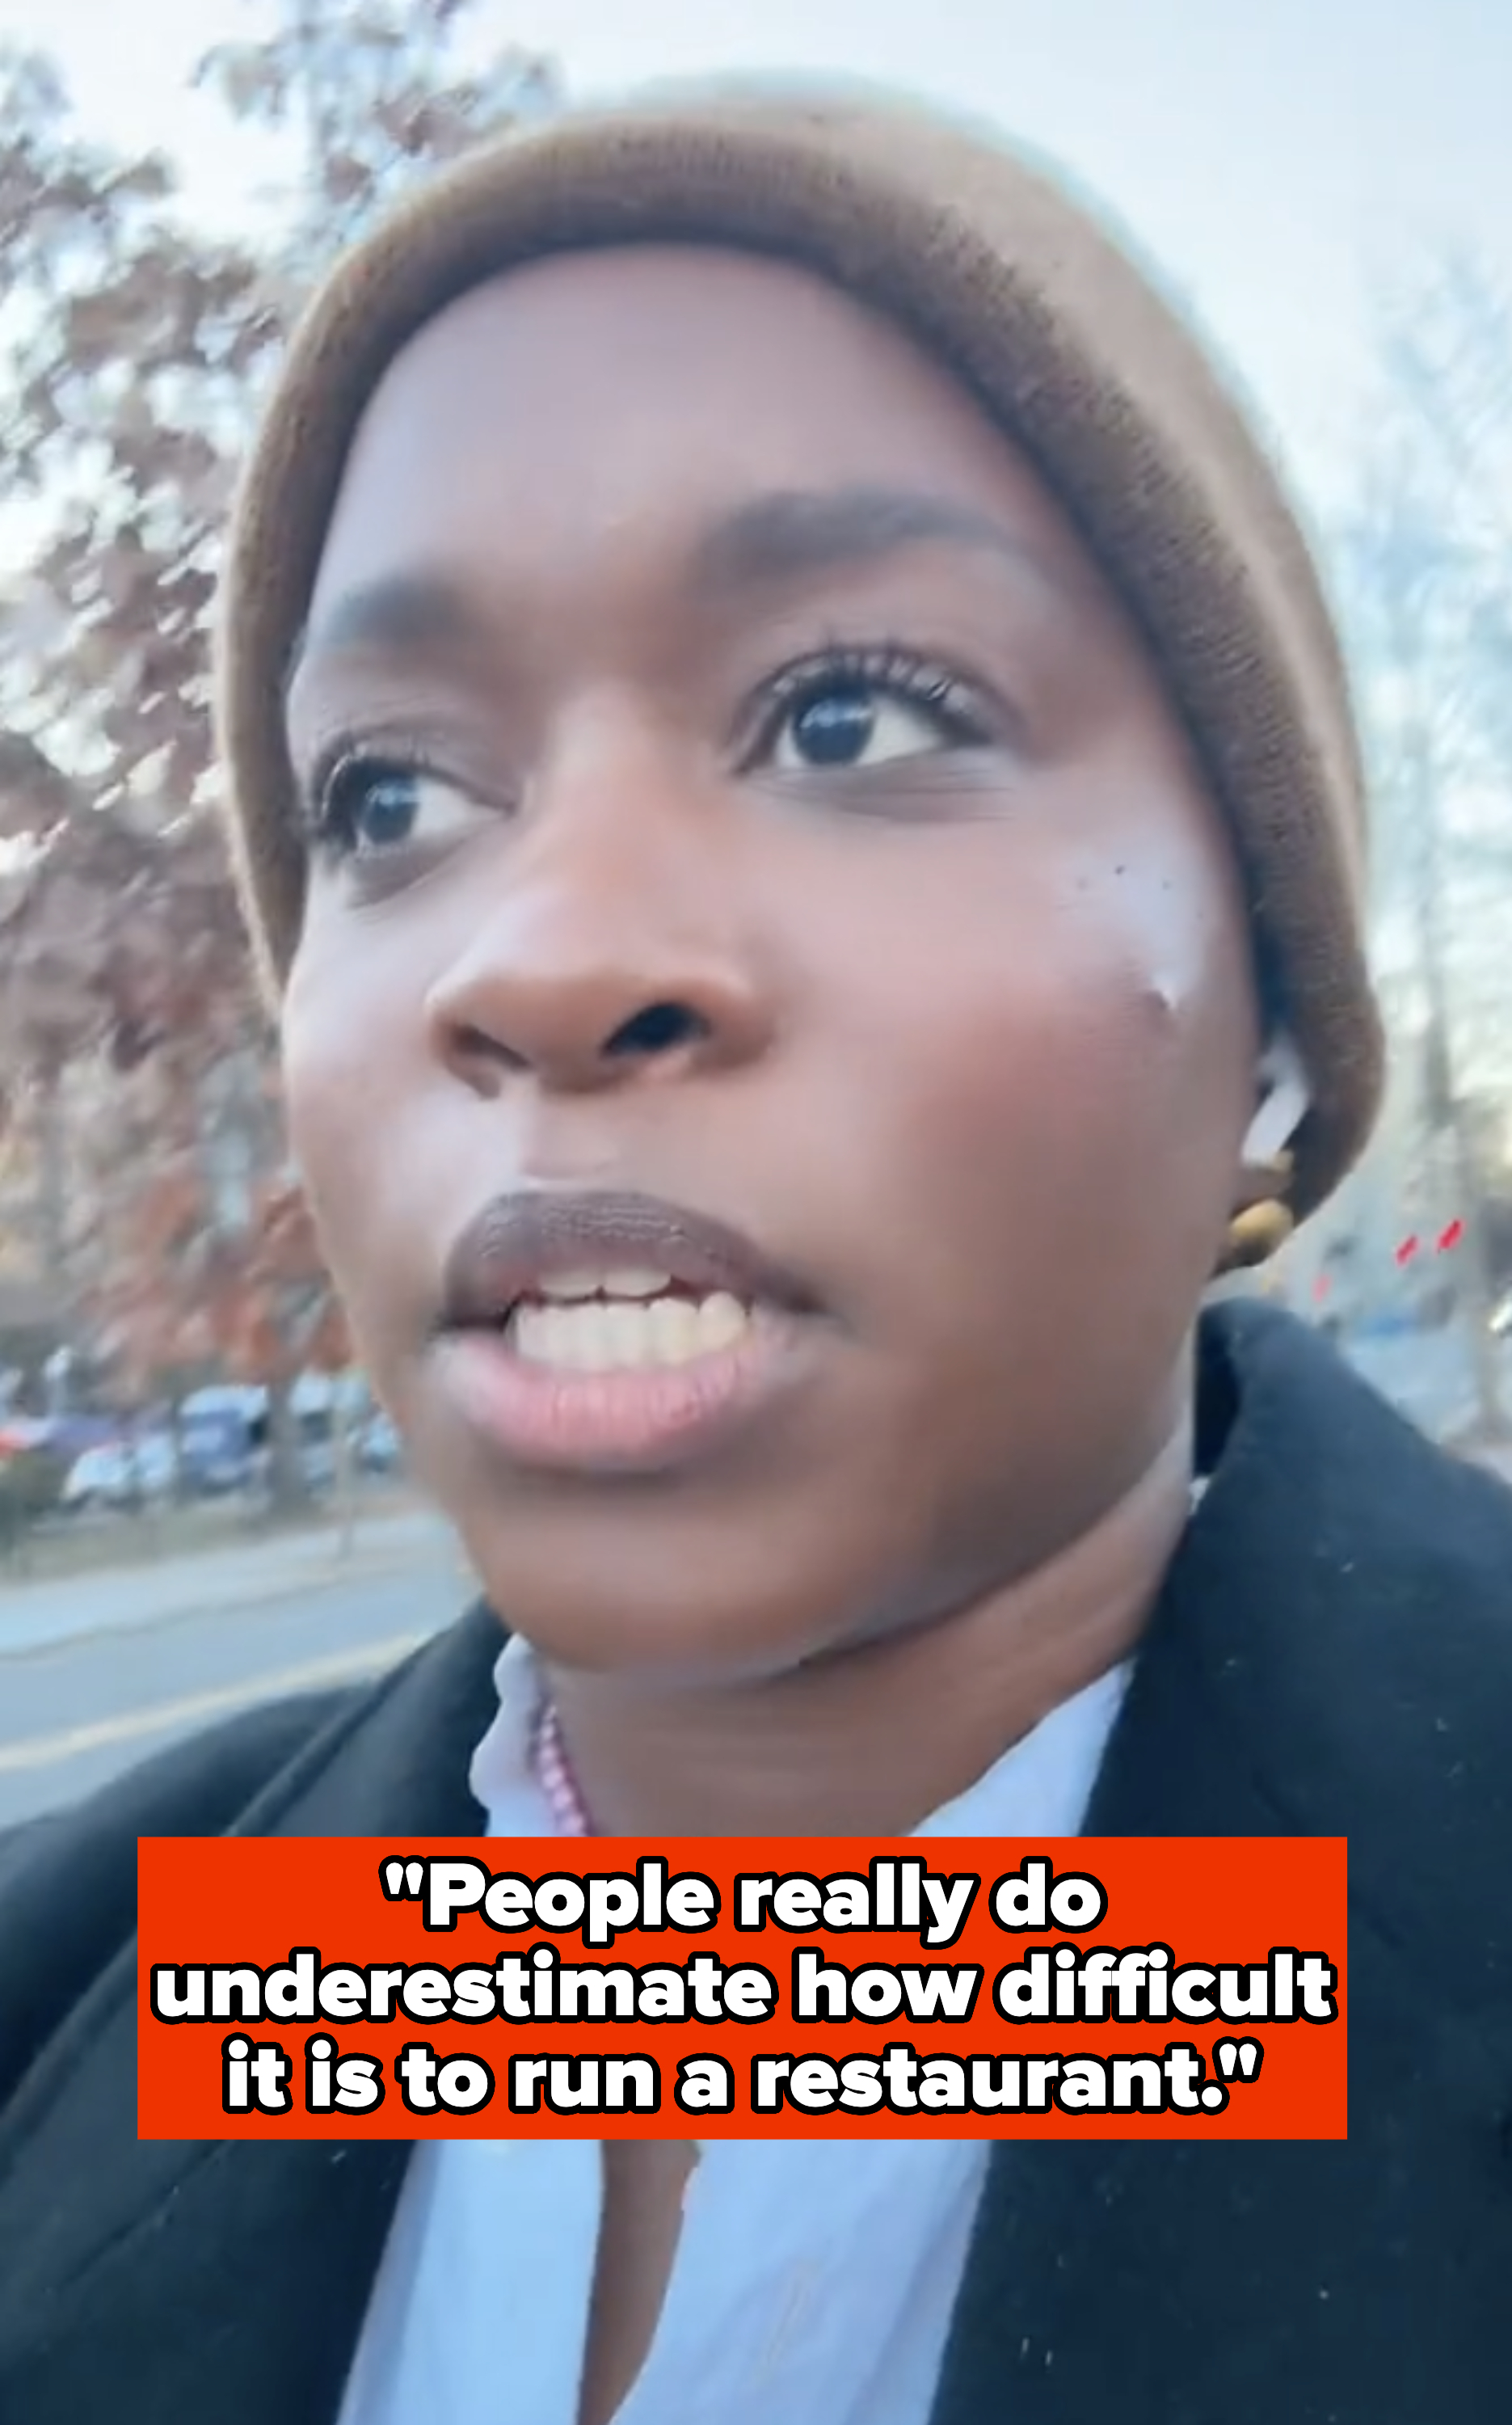 imani talking to the camera about the challenges of running a restaurant: &quot;People really do underestimate how difficult it is to run a restaurant&quot;